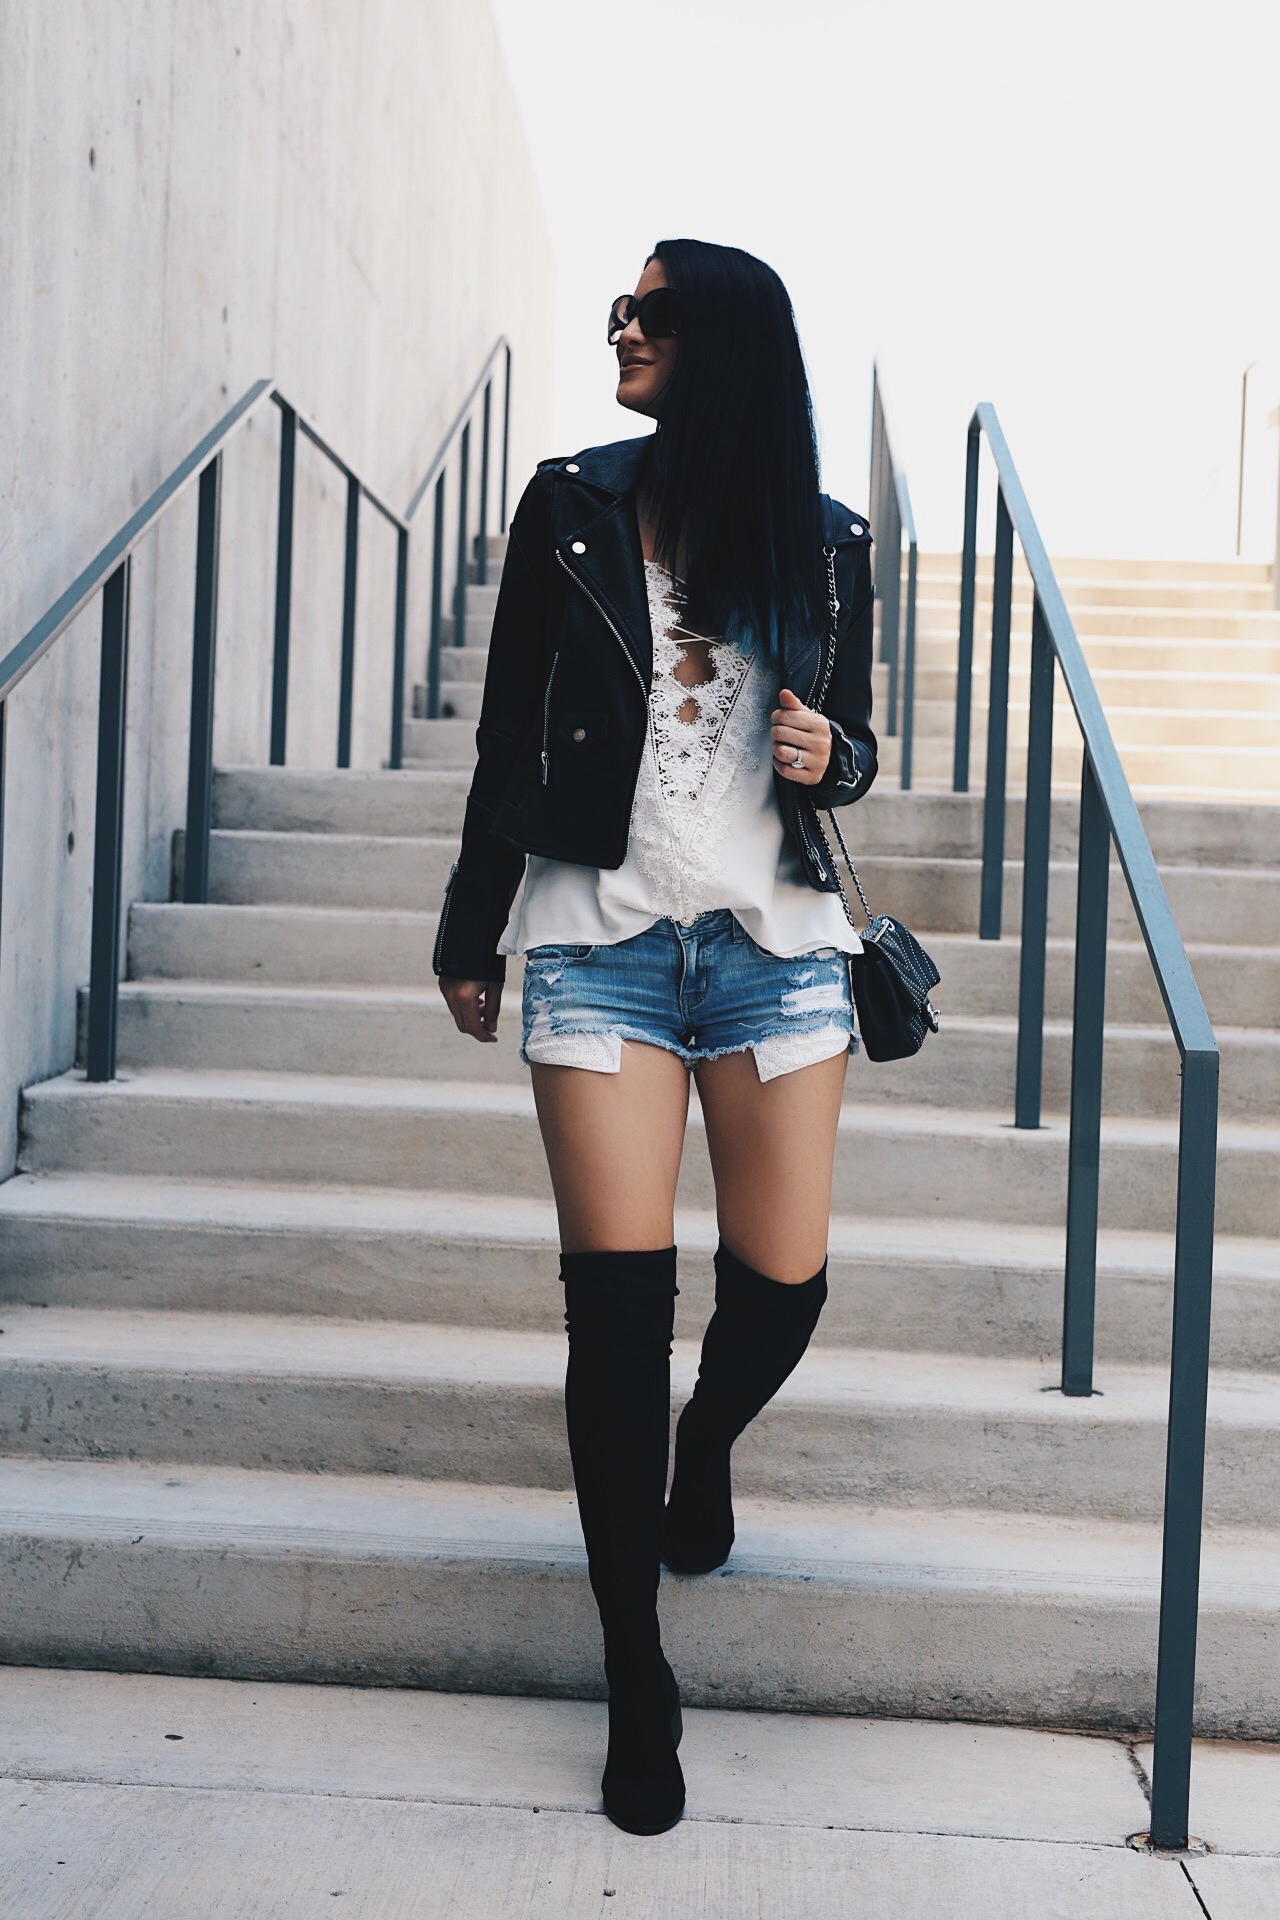 Austin Blogger DTKAustin shares her top shoe picks from the 2017 Nordstrom Anniversary Sale. Flats, heels, boots and booties are all included along with these Steve Madden Over the Knee boots and BlankNYC black jacket. | how to style over the knee boots | how to wear over the knee boots | OTK boot style ideas | OTK boot fashion tips | fashion tips for fall | fall style ideas | how to wear OTK boots || Dressed to Kill